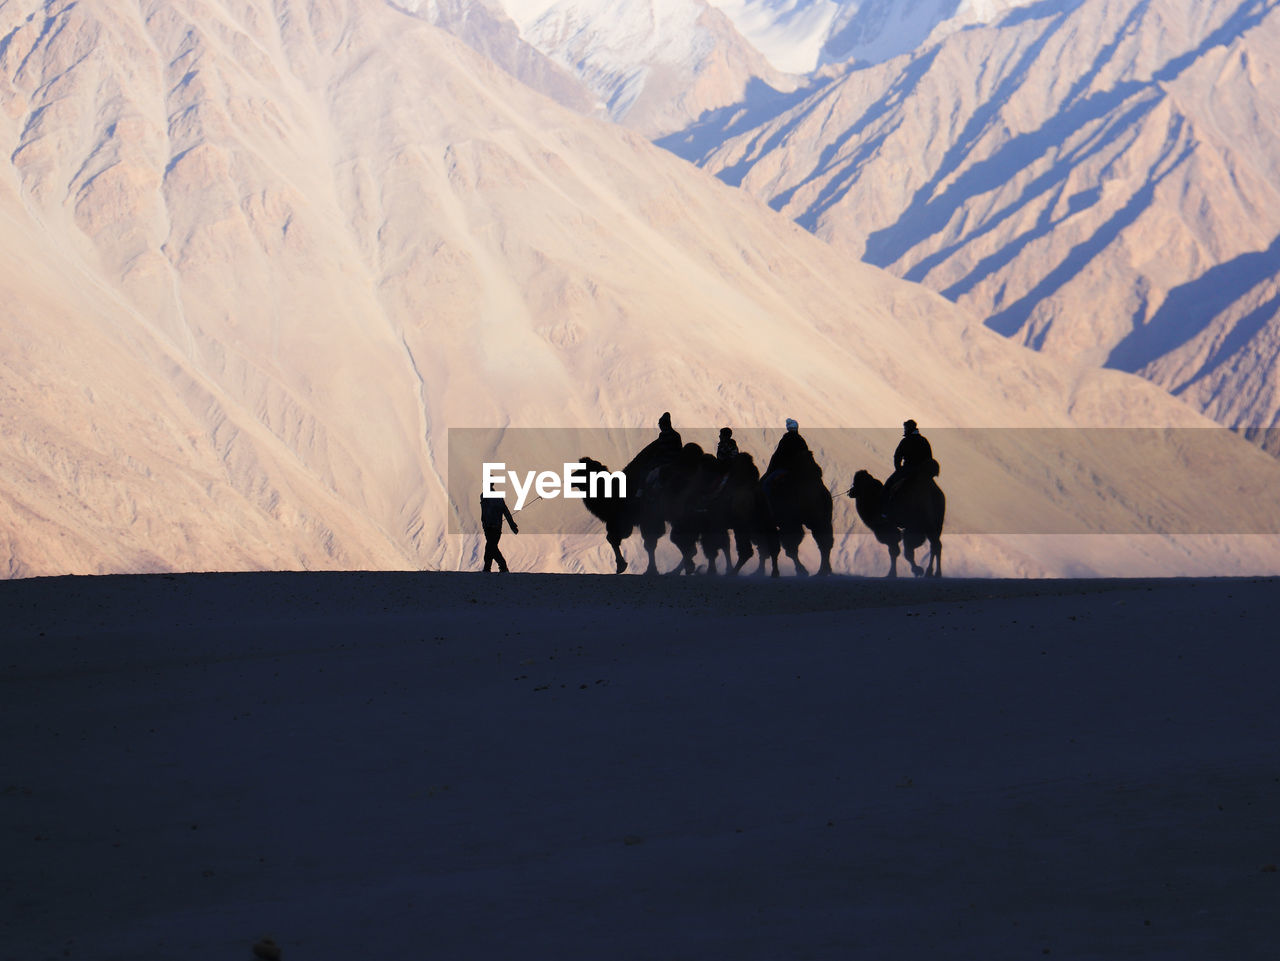 People riding camels on sand against mountains